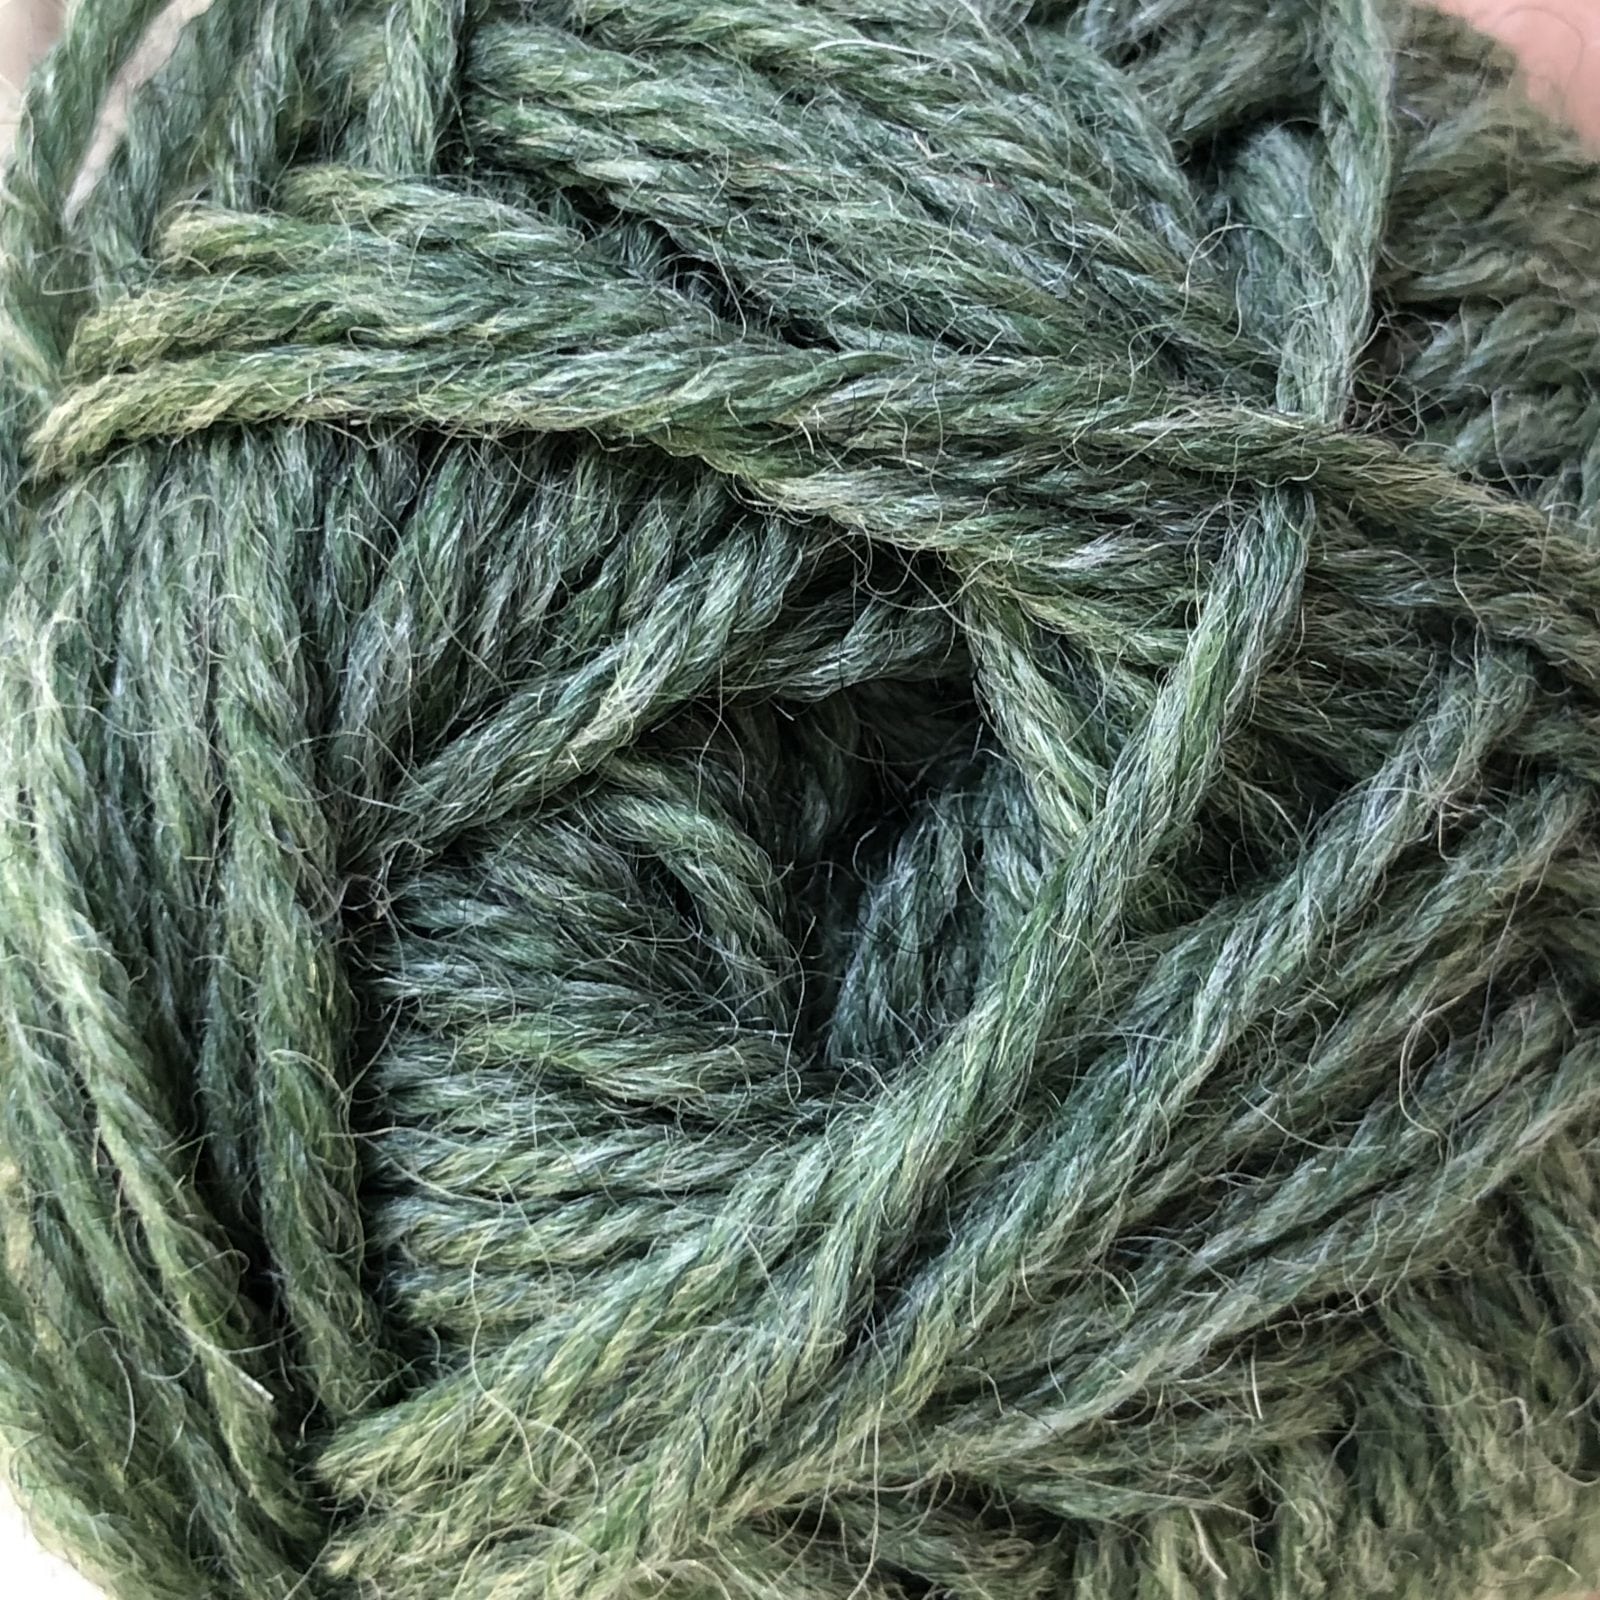 Countrywide Windsor 100% New Zealand wool yarn 8ply 8 ply double knit dk Marled Green Shade 80